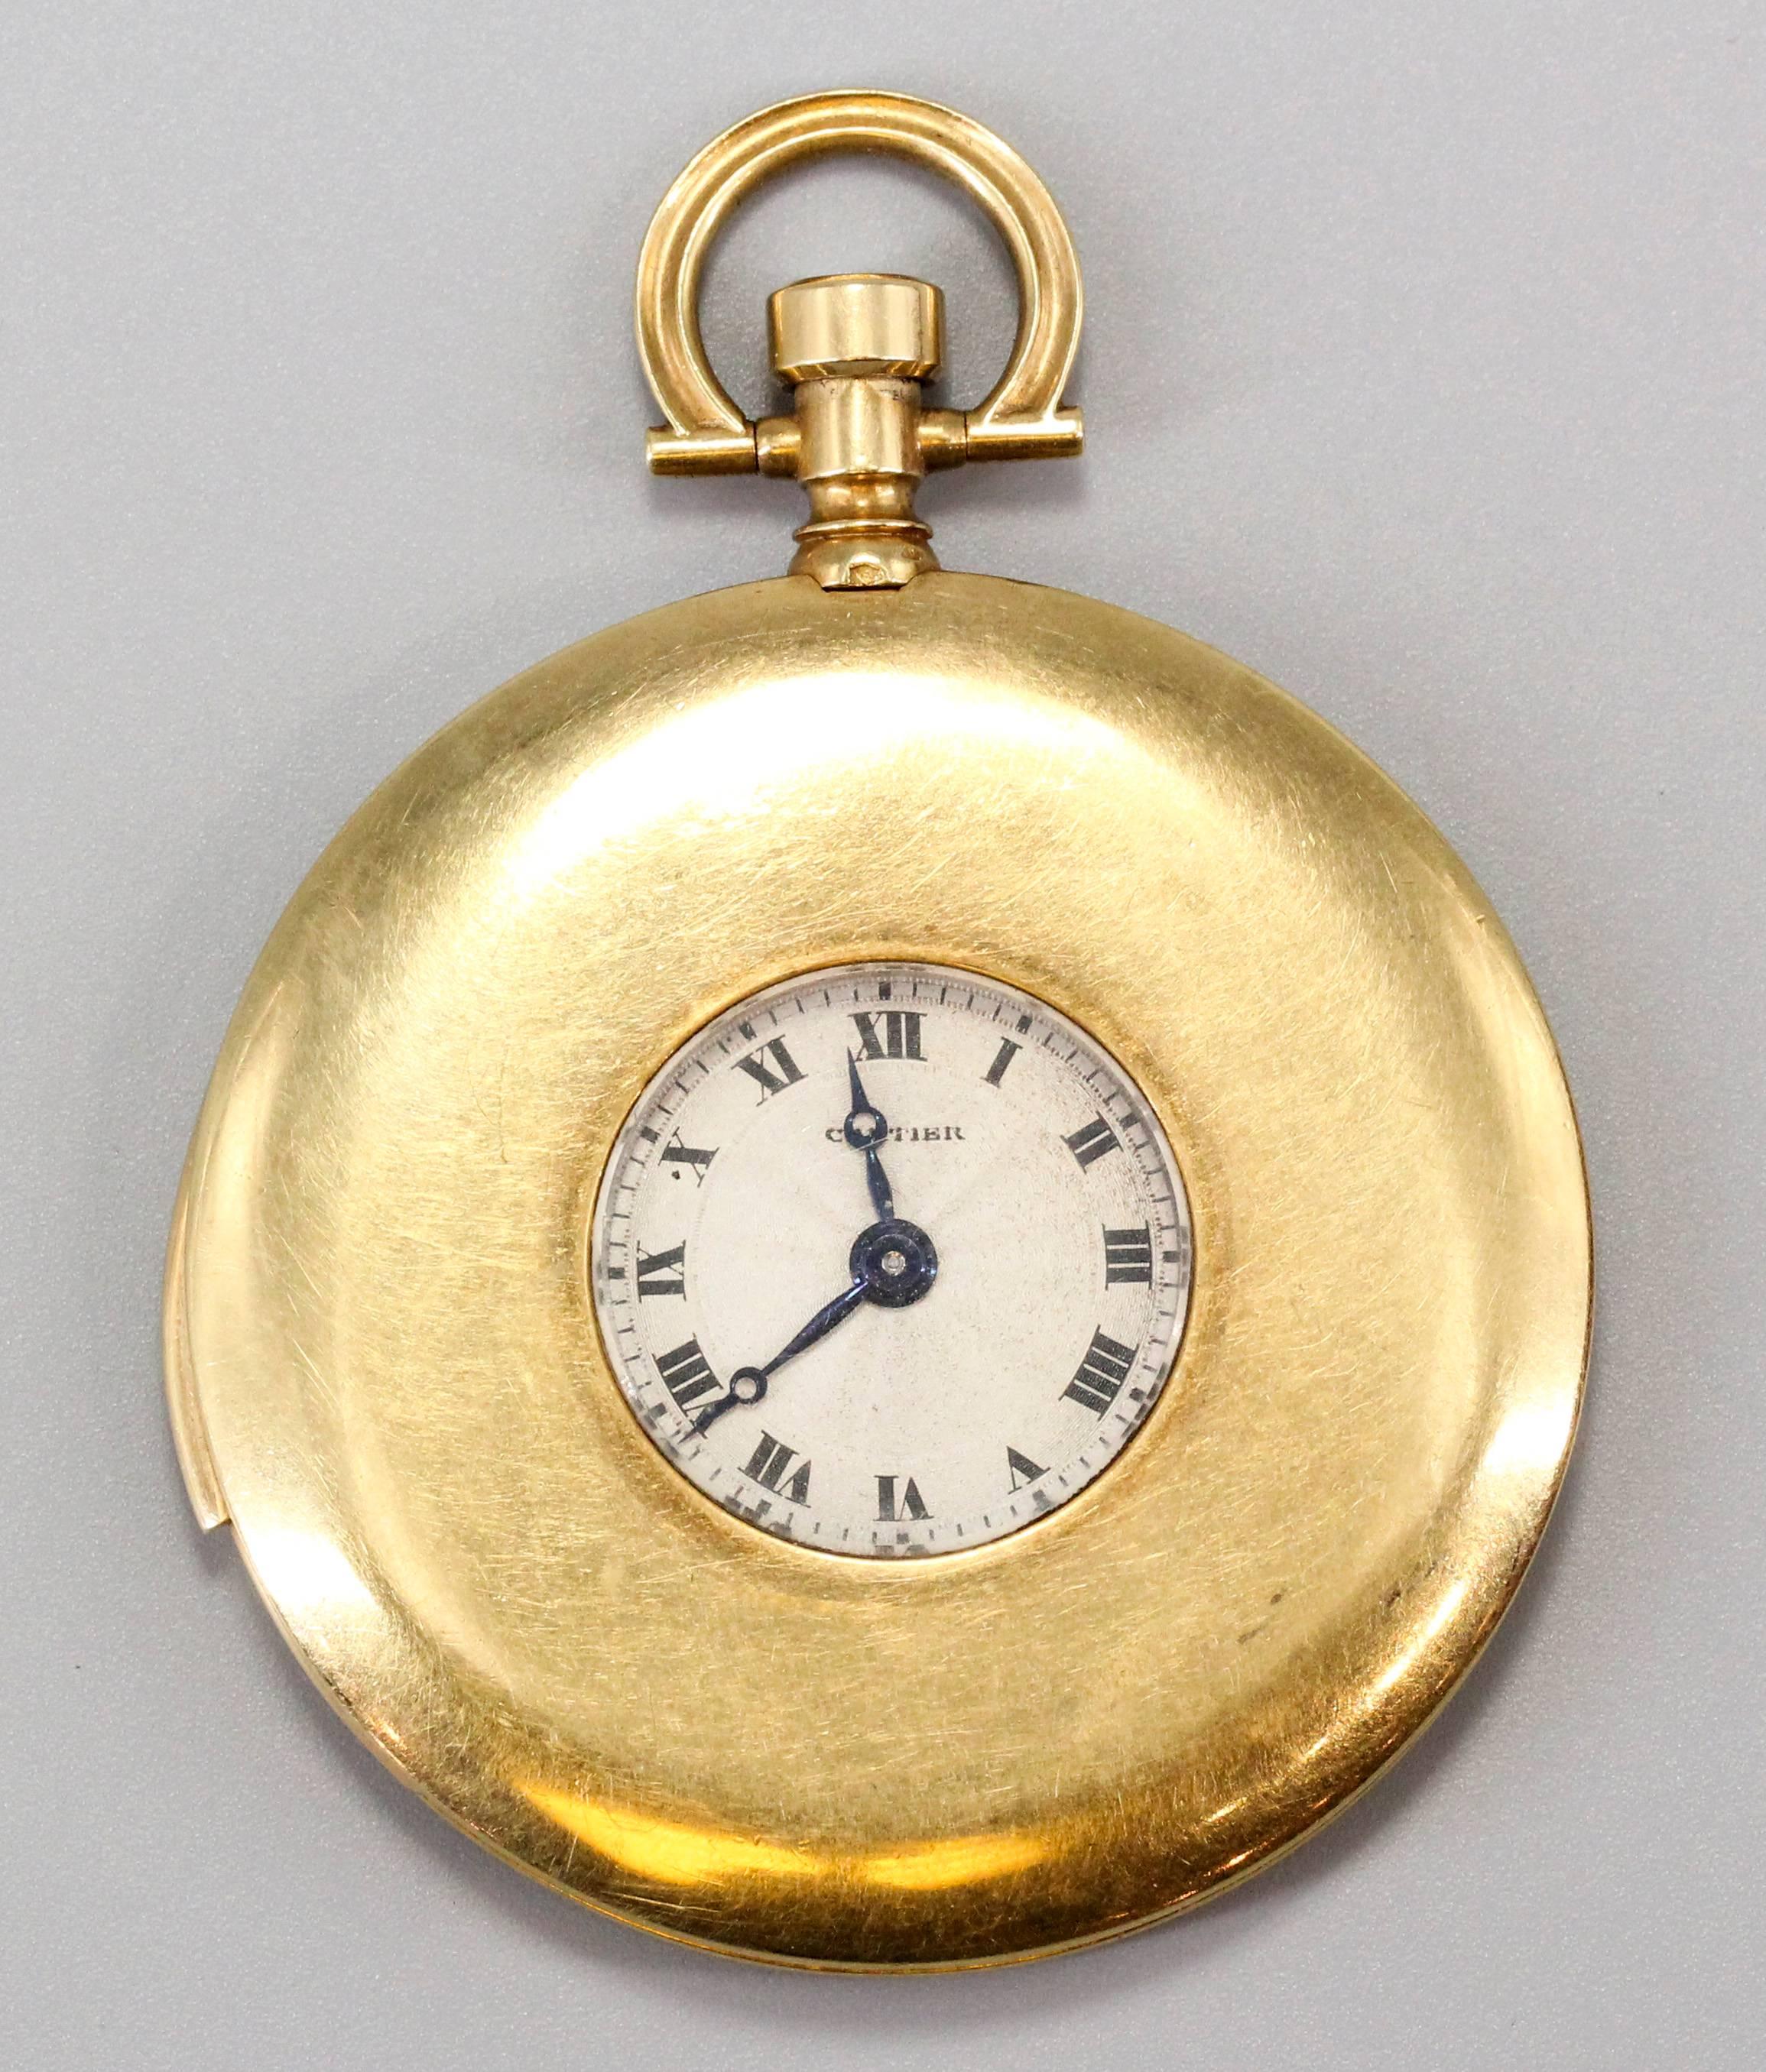 Very fine and rare 18k yellow gold minute repeater pocket watch by Cartier, circa 1910. It features a very slim case, a minute repeating mechanism by EWC (European Watch & Co.), and with spring loaded sliding shutter aperture, also known as the